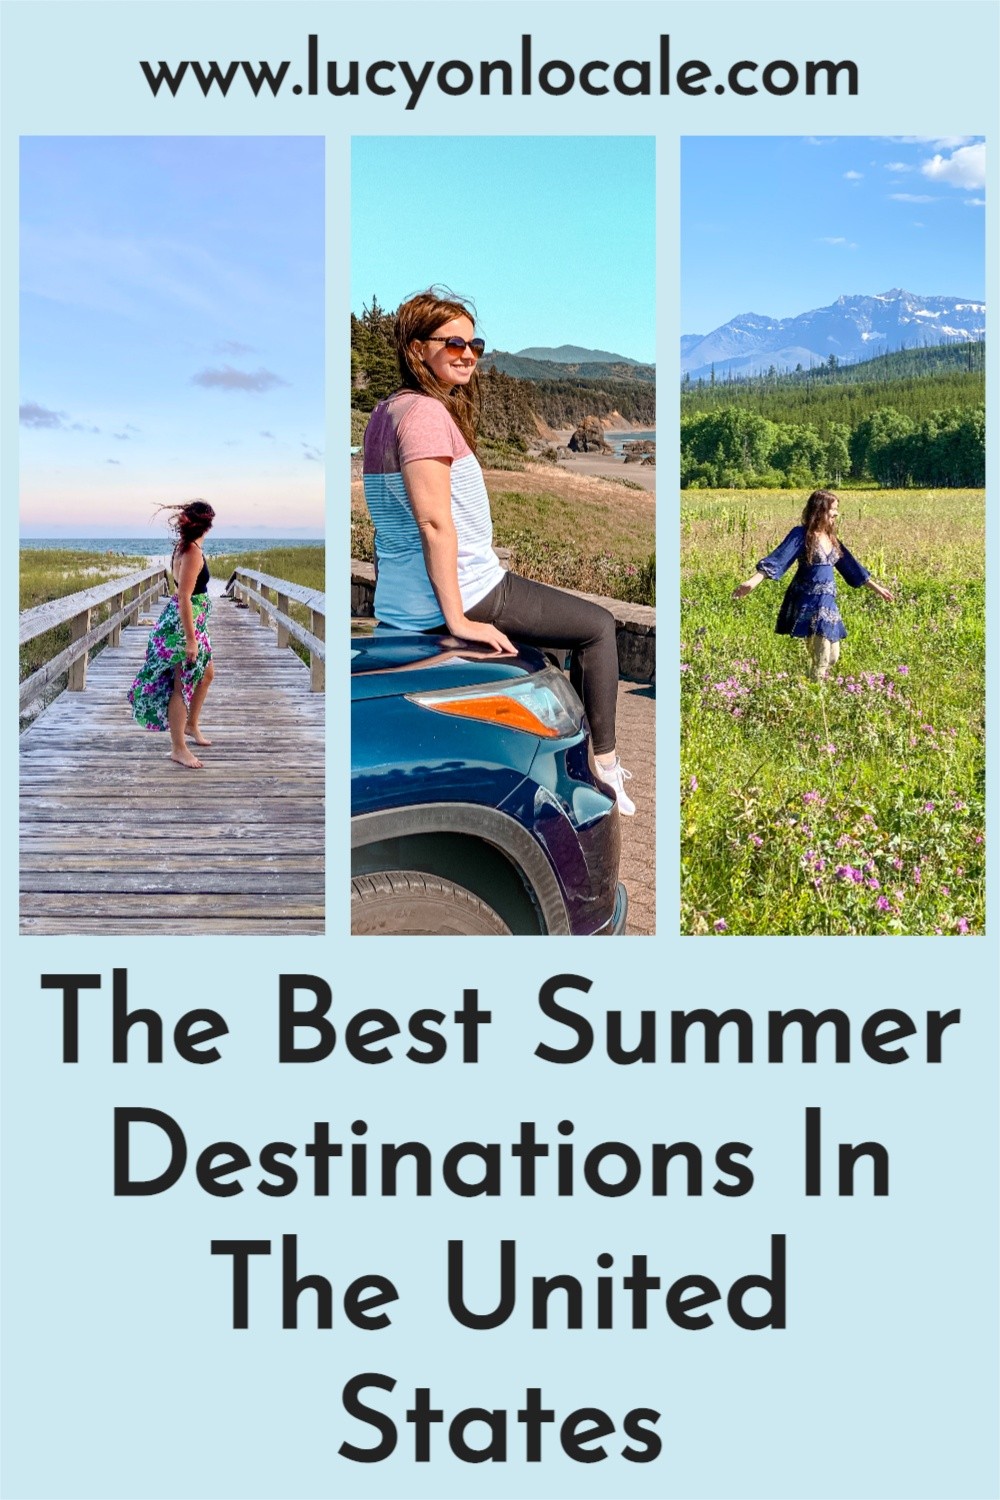 The best summer destinations in The United States